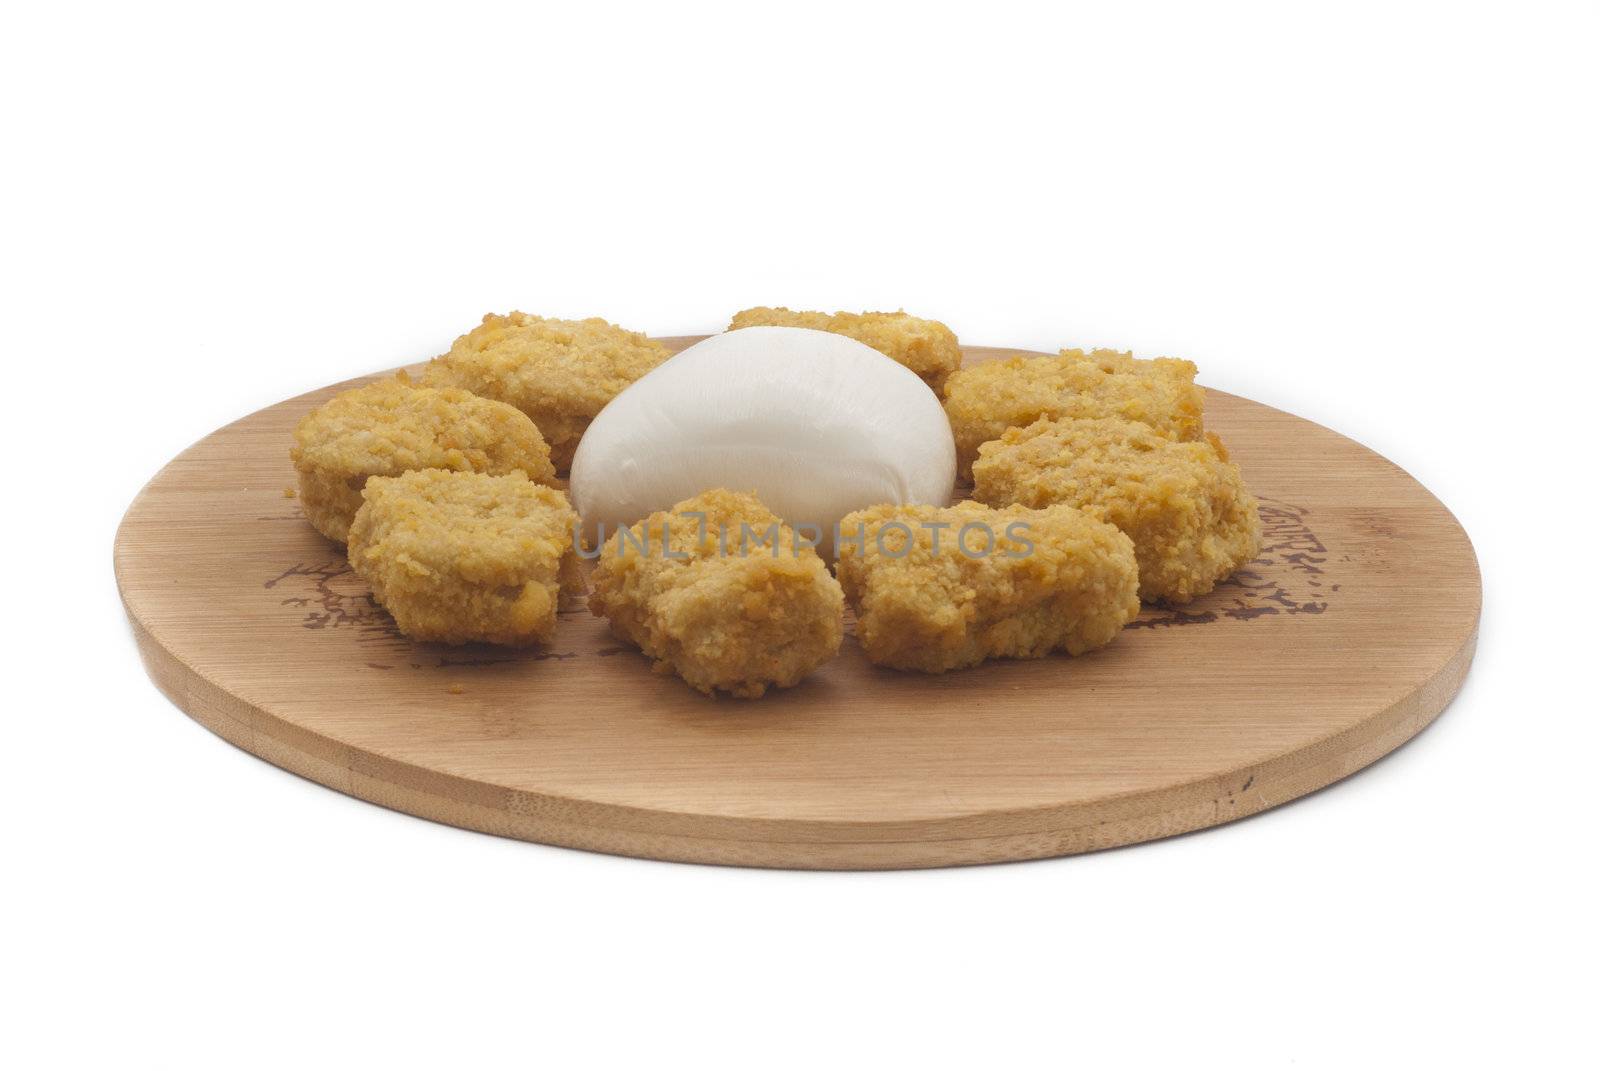 fried chicken nuggets and mozzarella cheese on wooden desk